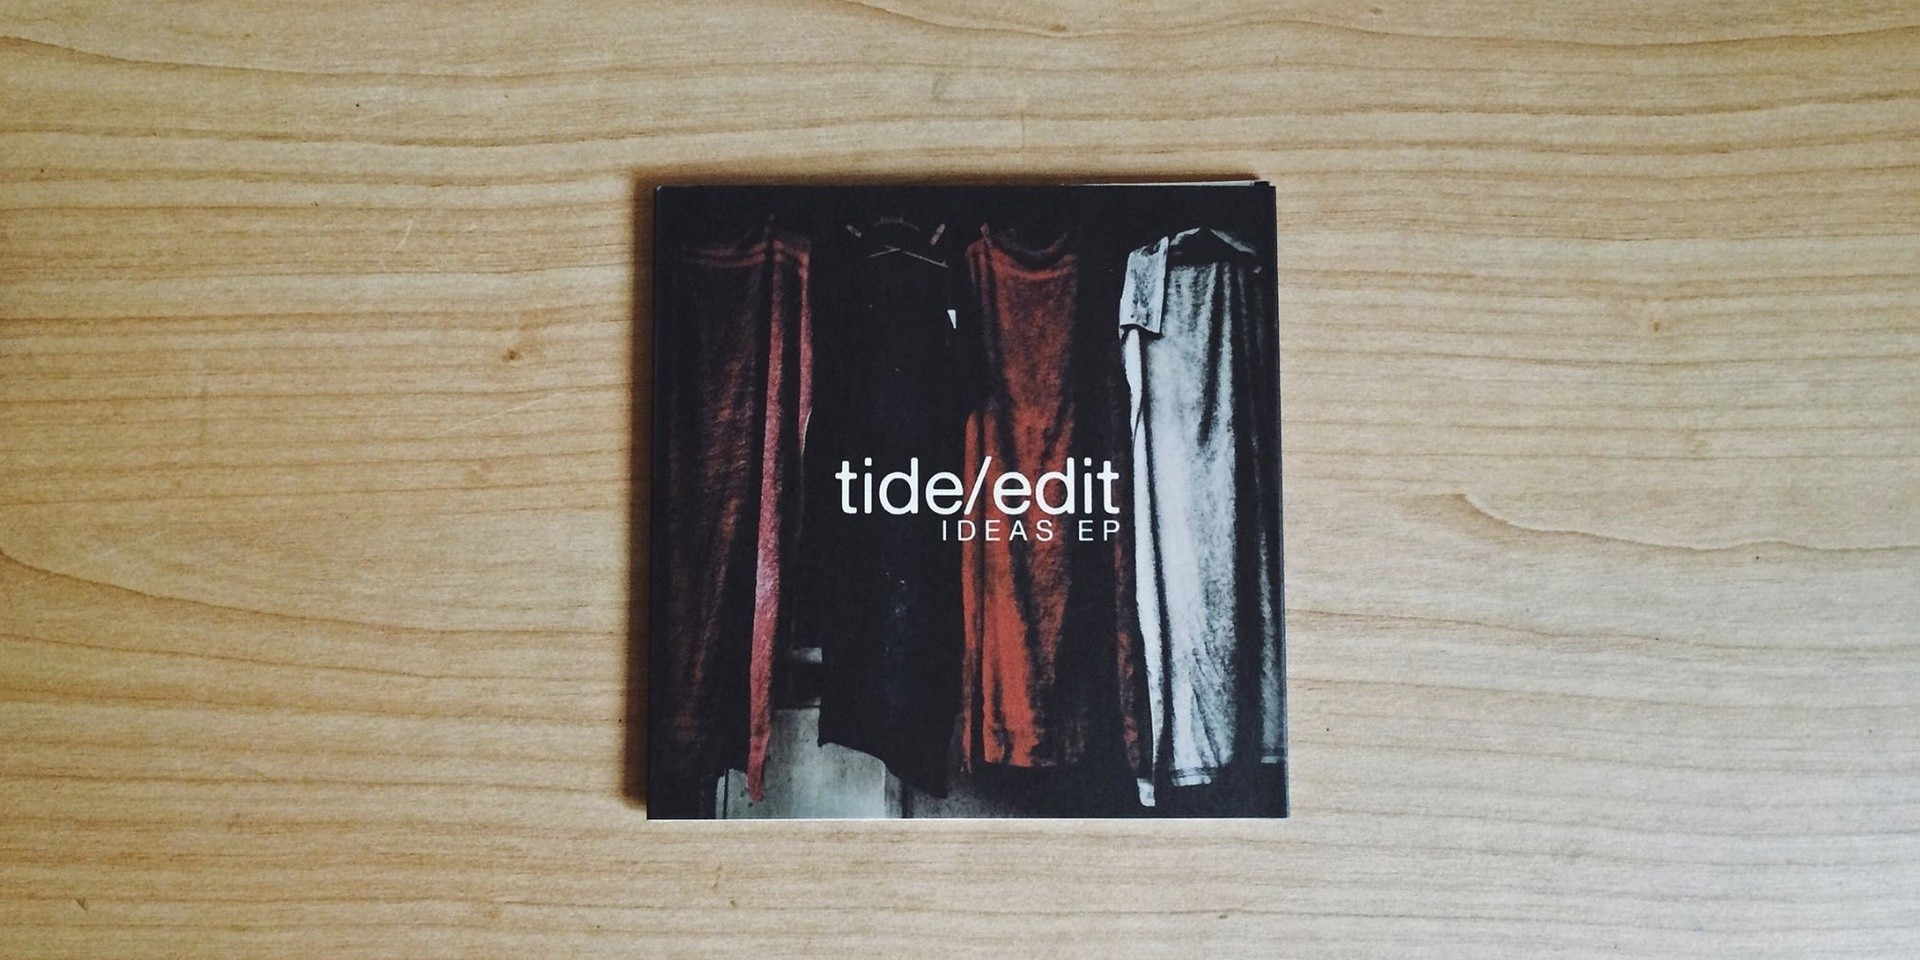 tide/edit's Ideas EP turns 5 with special live release 